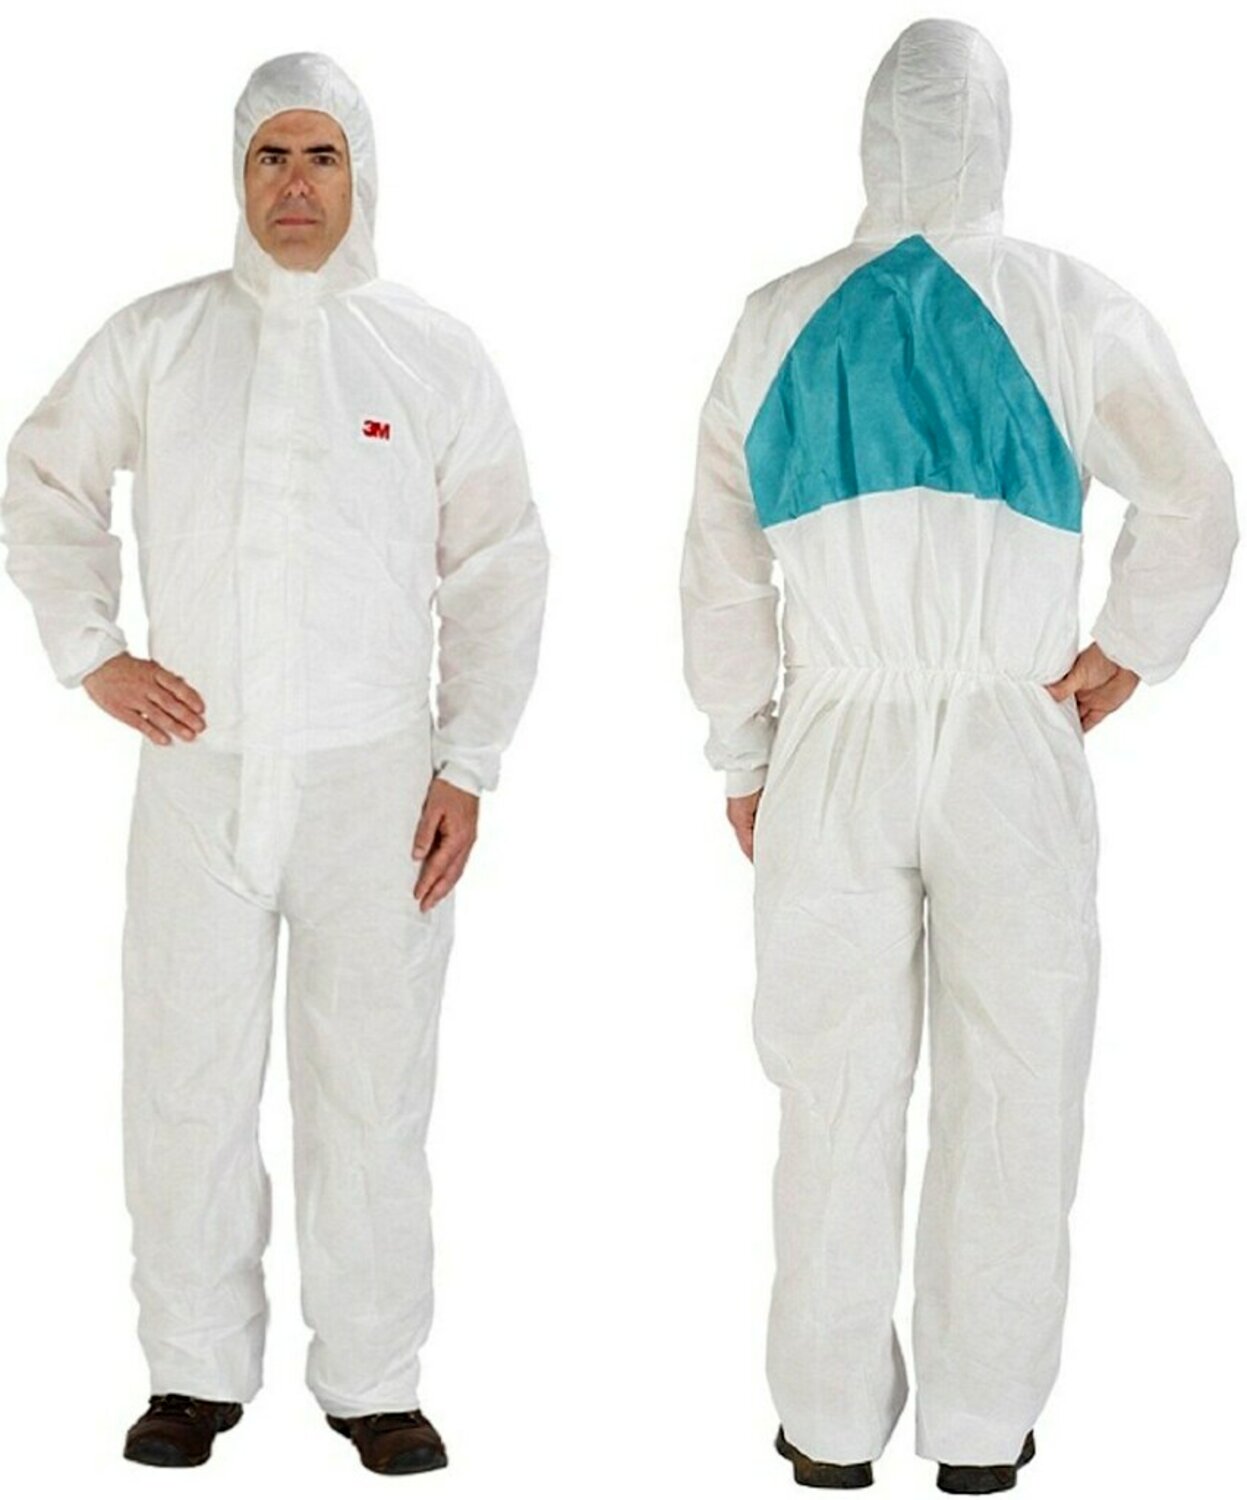 7000034763 - 3M Disposable Protective Coverall 4520-XL White/Green Type 5/6, 20 ea/Case